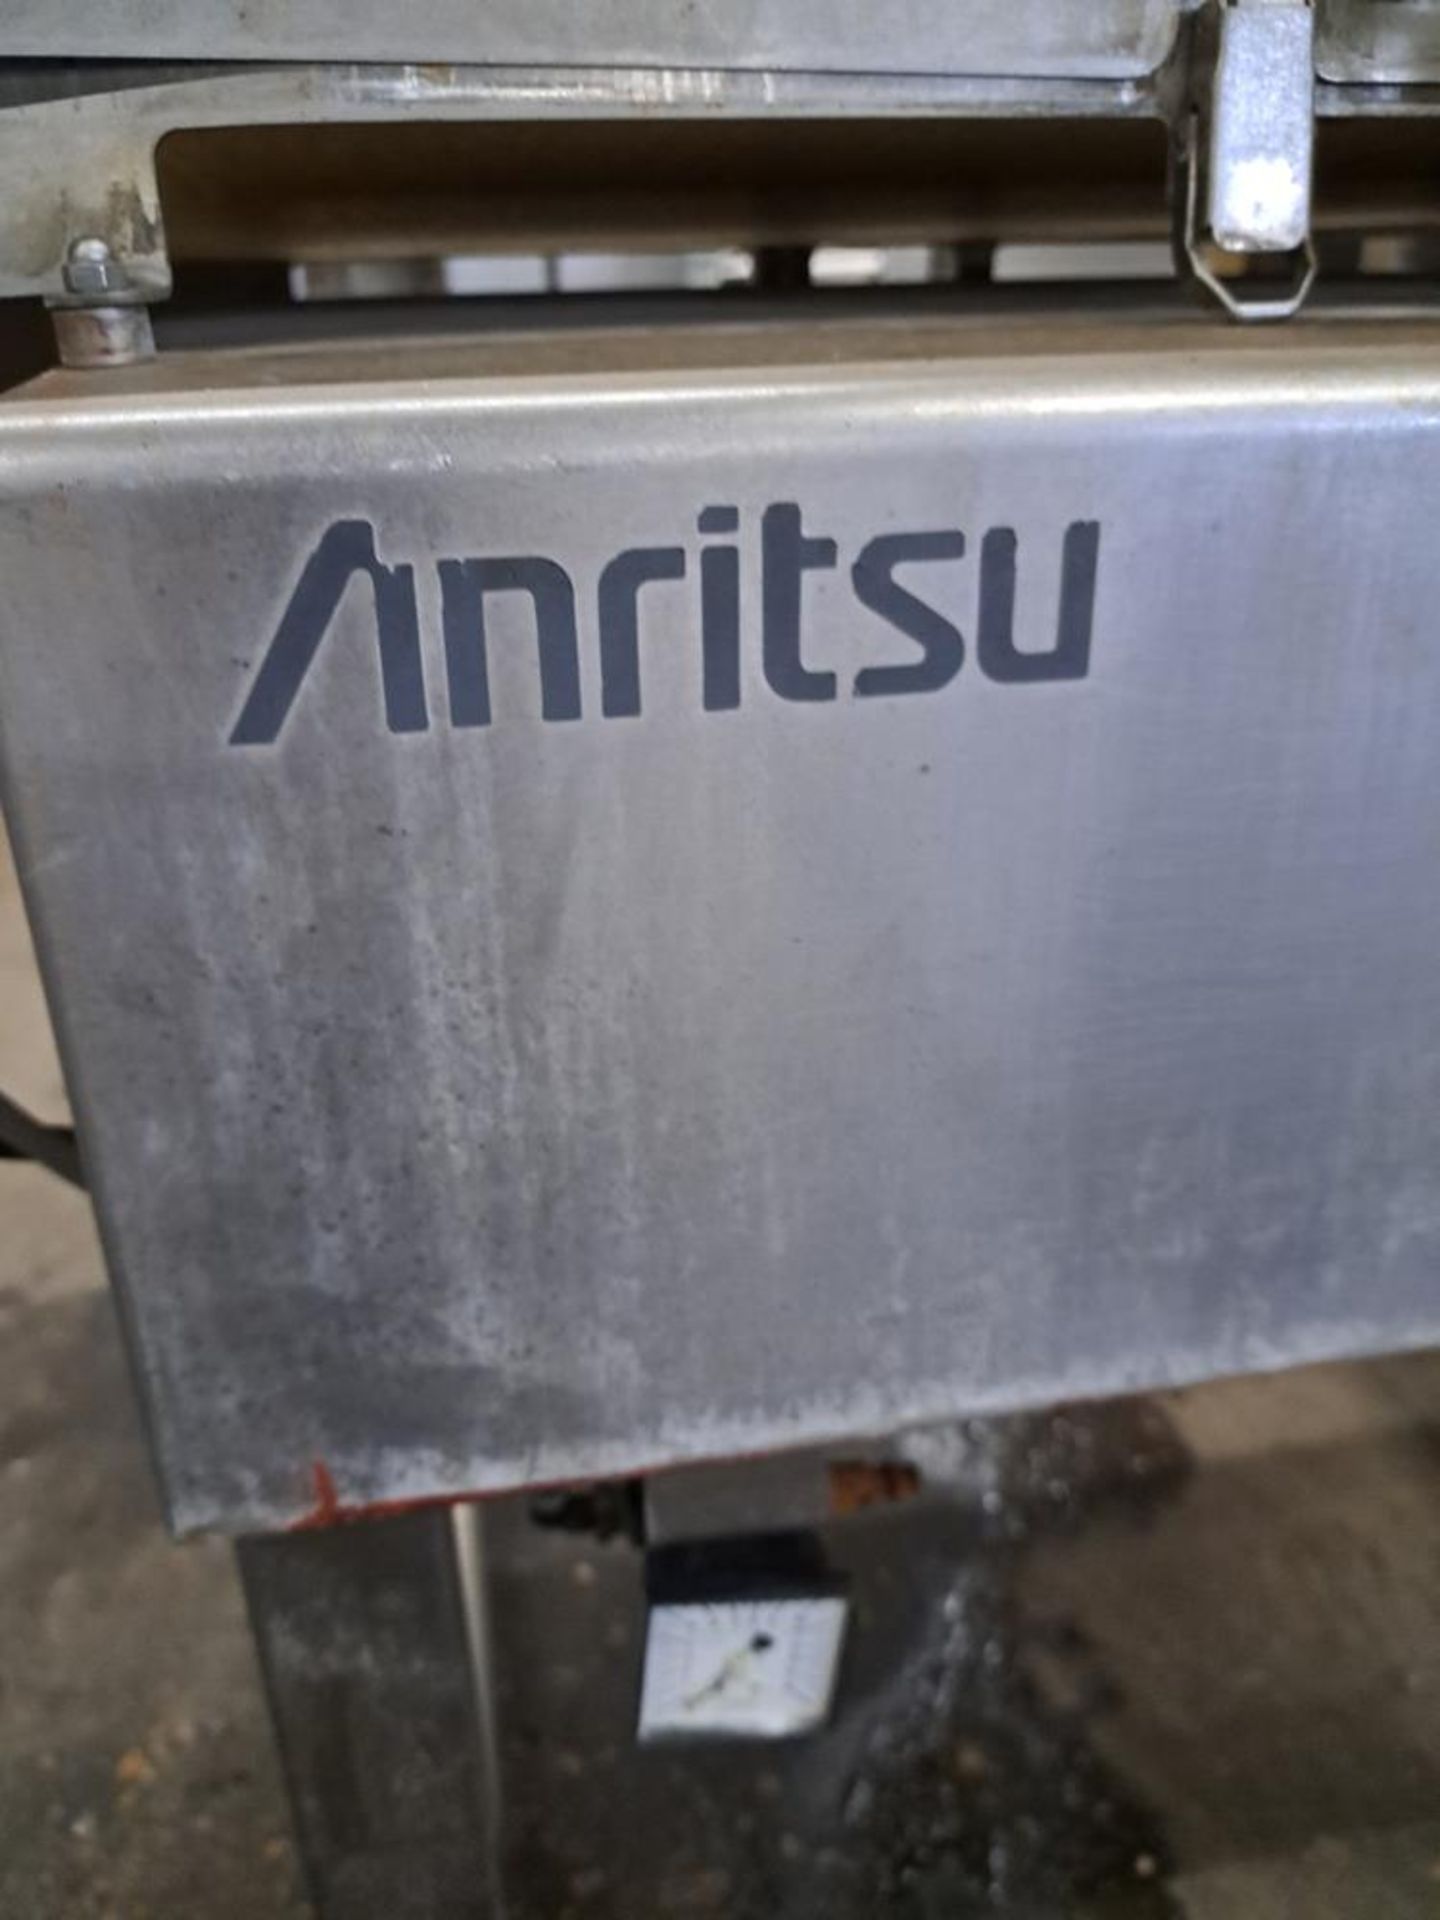 Anritsu Conveyor, 13" wide X 33" long X 26" tall (Located in Sandwich, IL) - Image 3 of 4